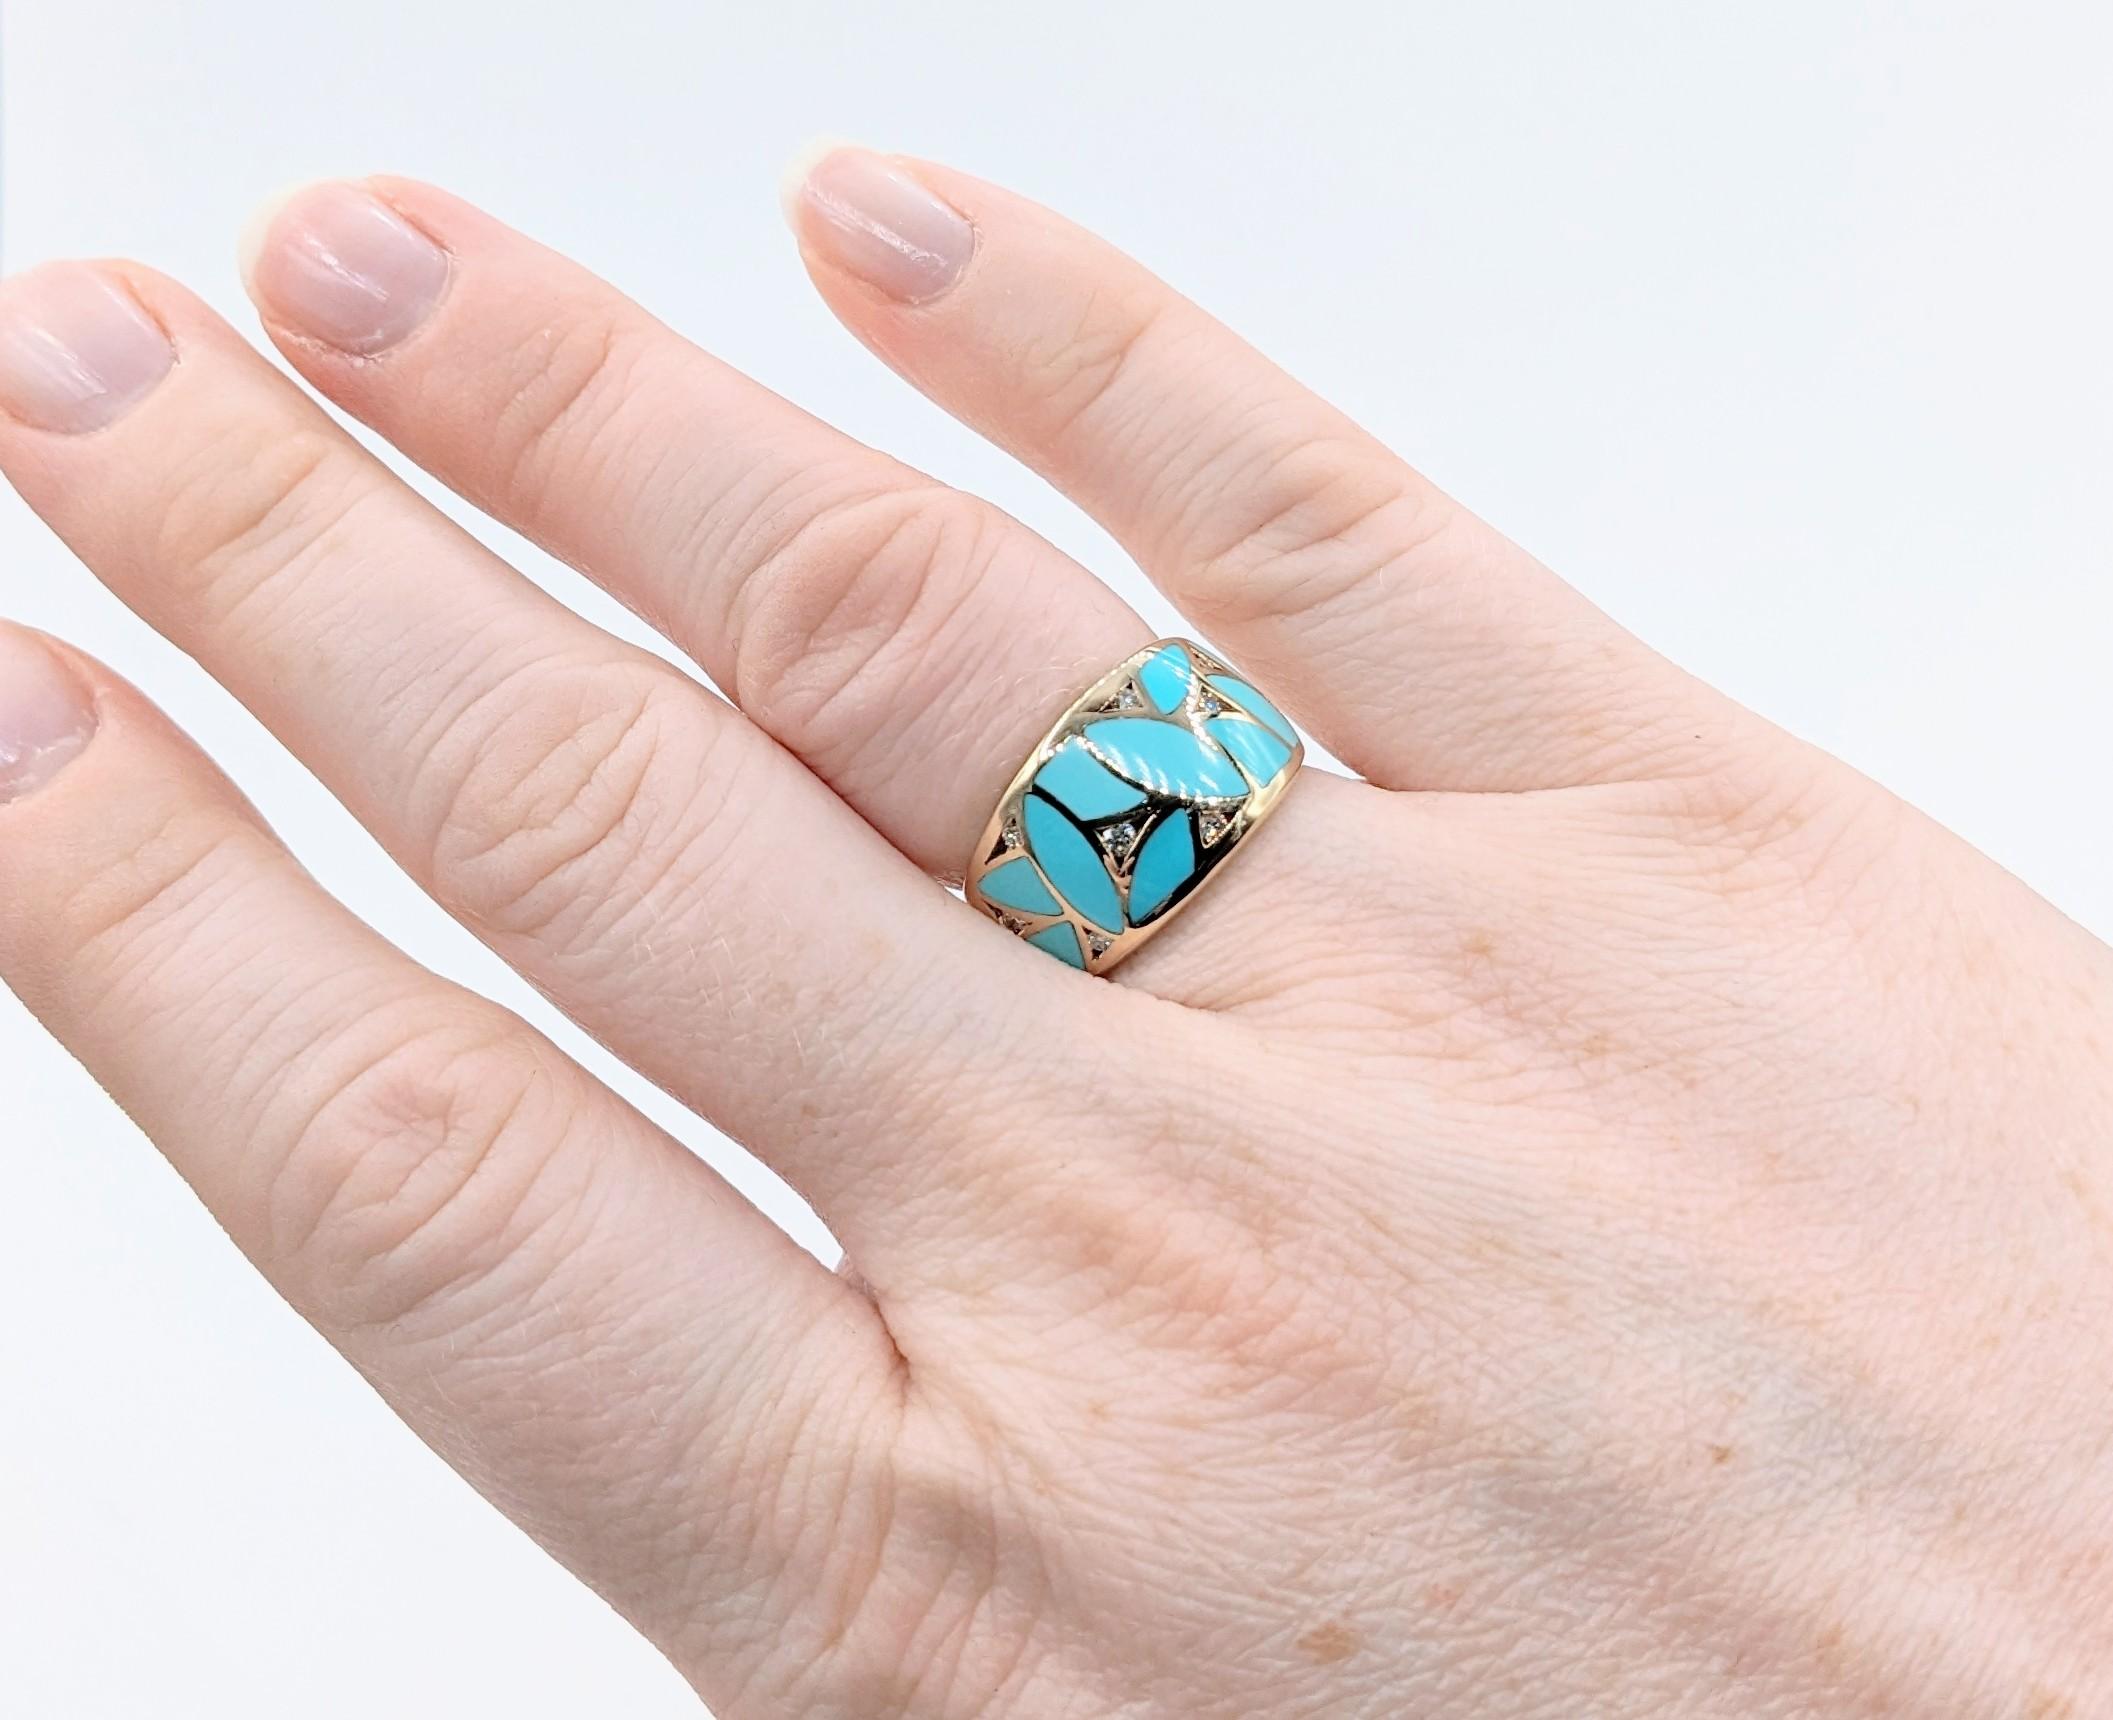 Modernist Mosaic Wide Inlaid Turquoise & Diamond Band Ring